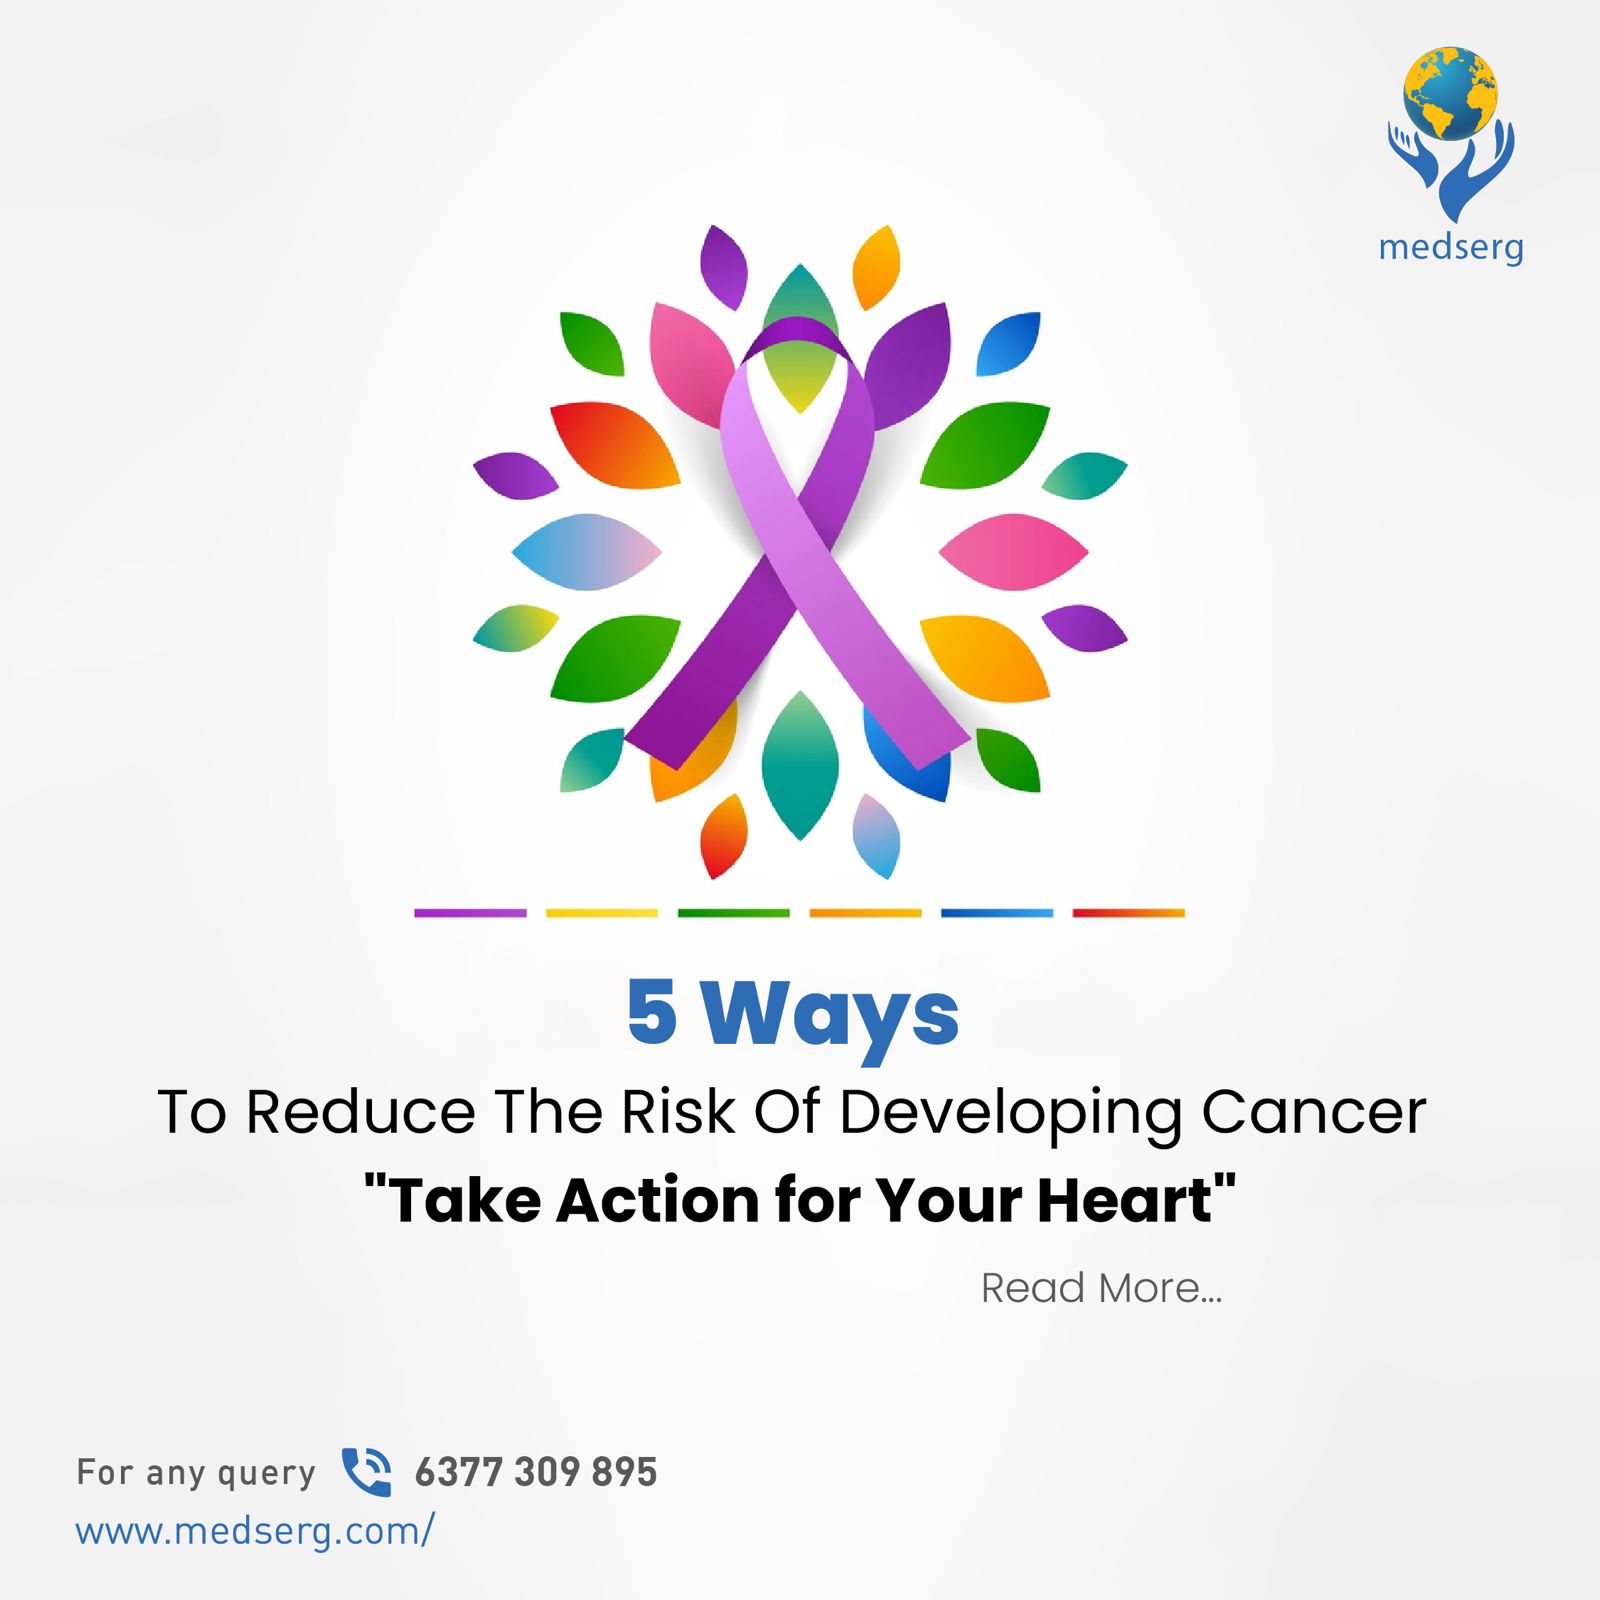 5 Ways To Reduce The Risk Of Developing Cancer